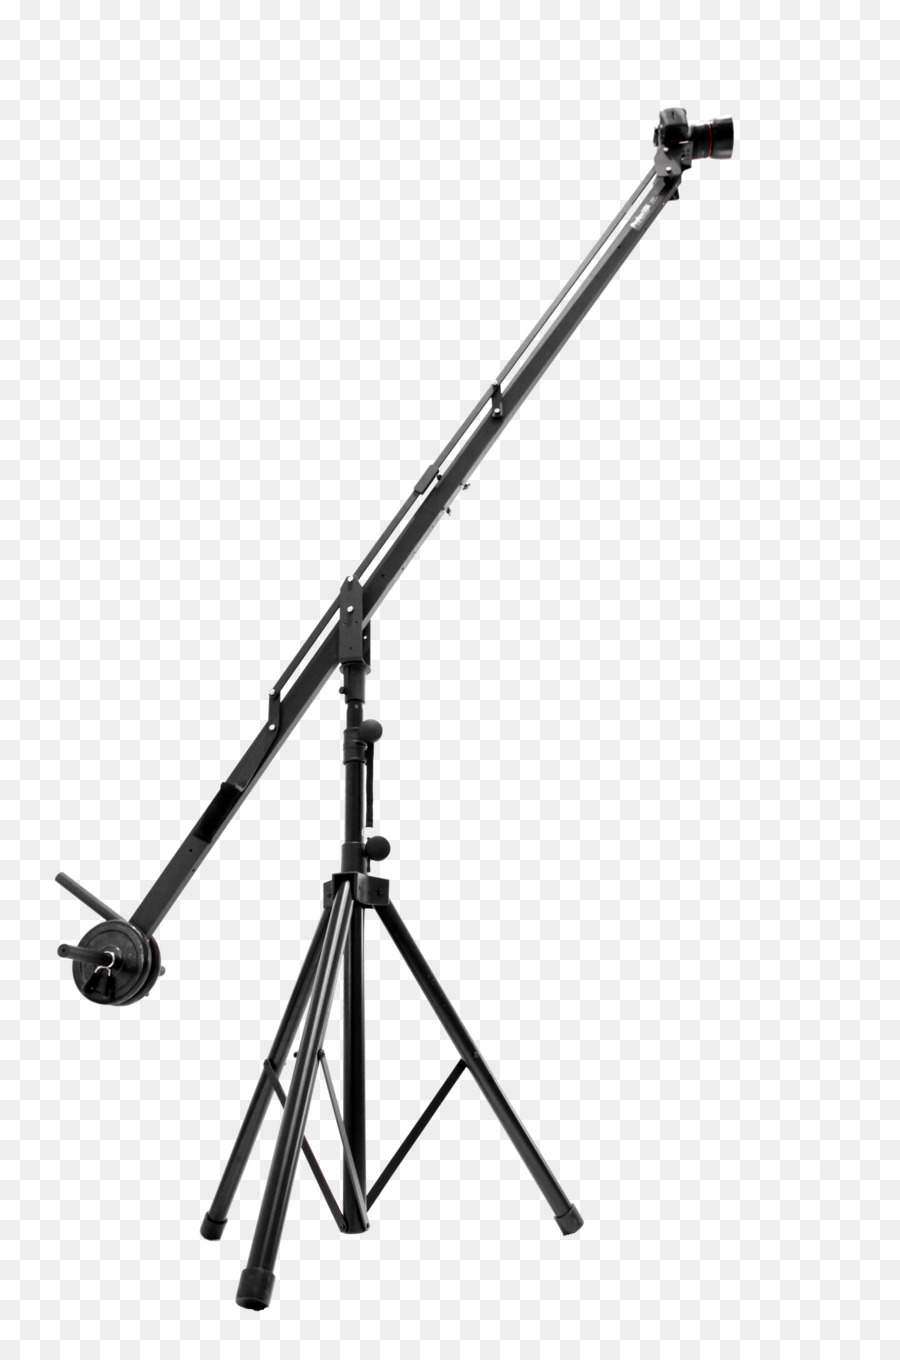 Microphone Stands Tripod Line - microphone png download - 1856*2784 - Free Transparent Microphone Stands png Download.